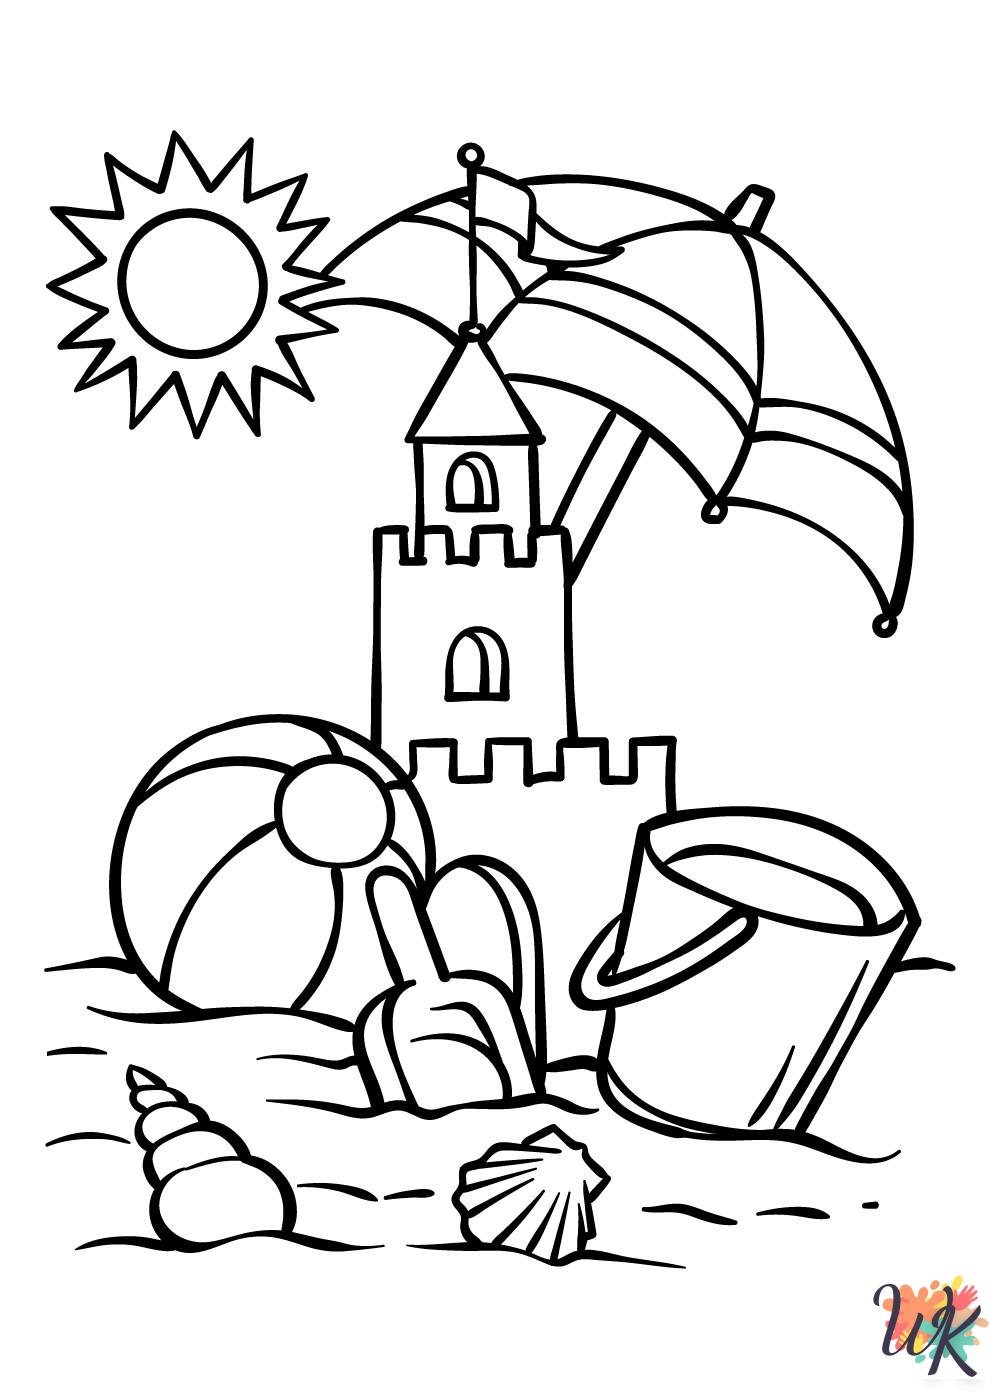 merry Summer coloring pages